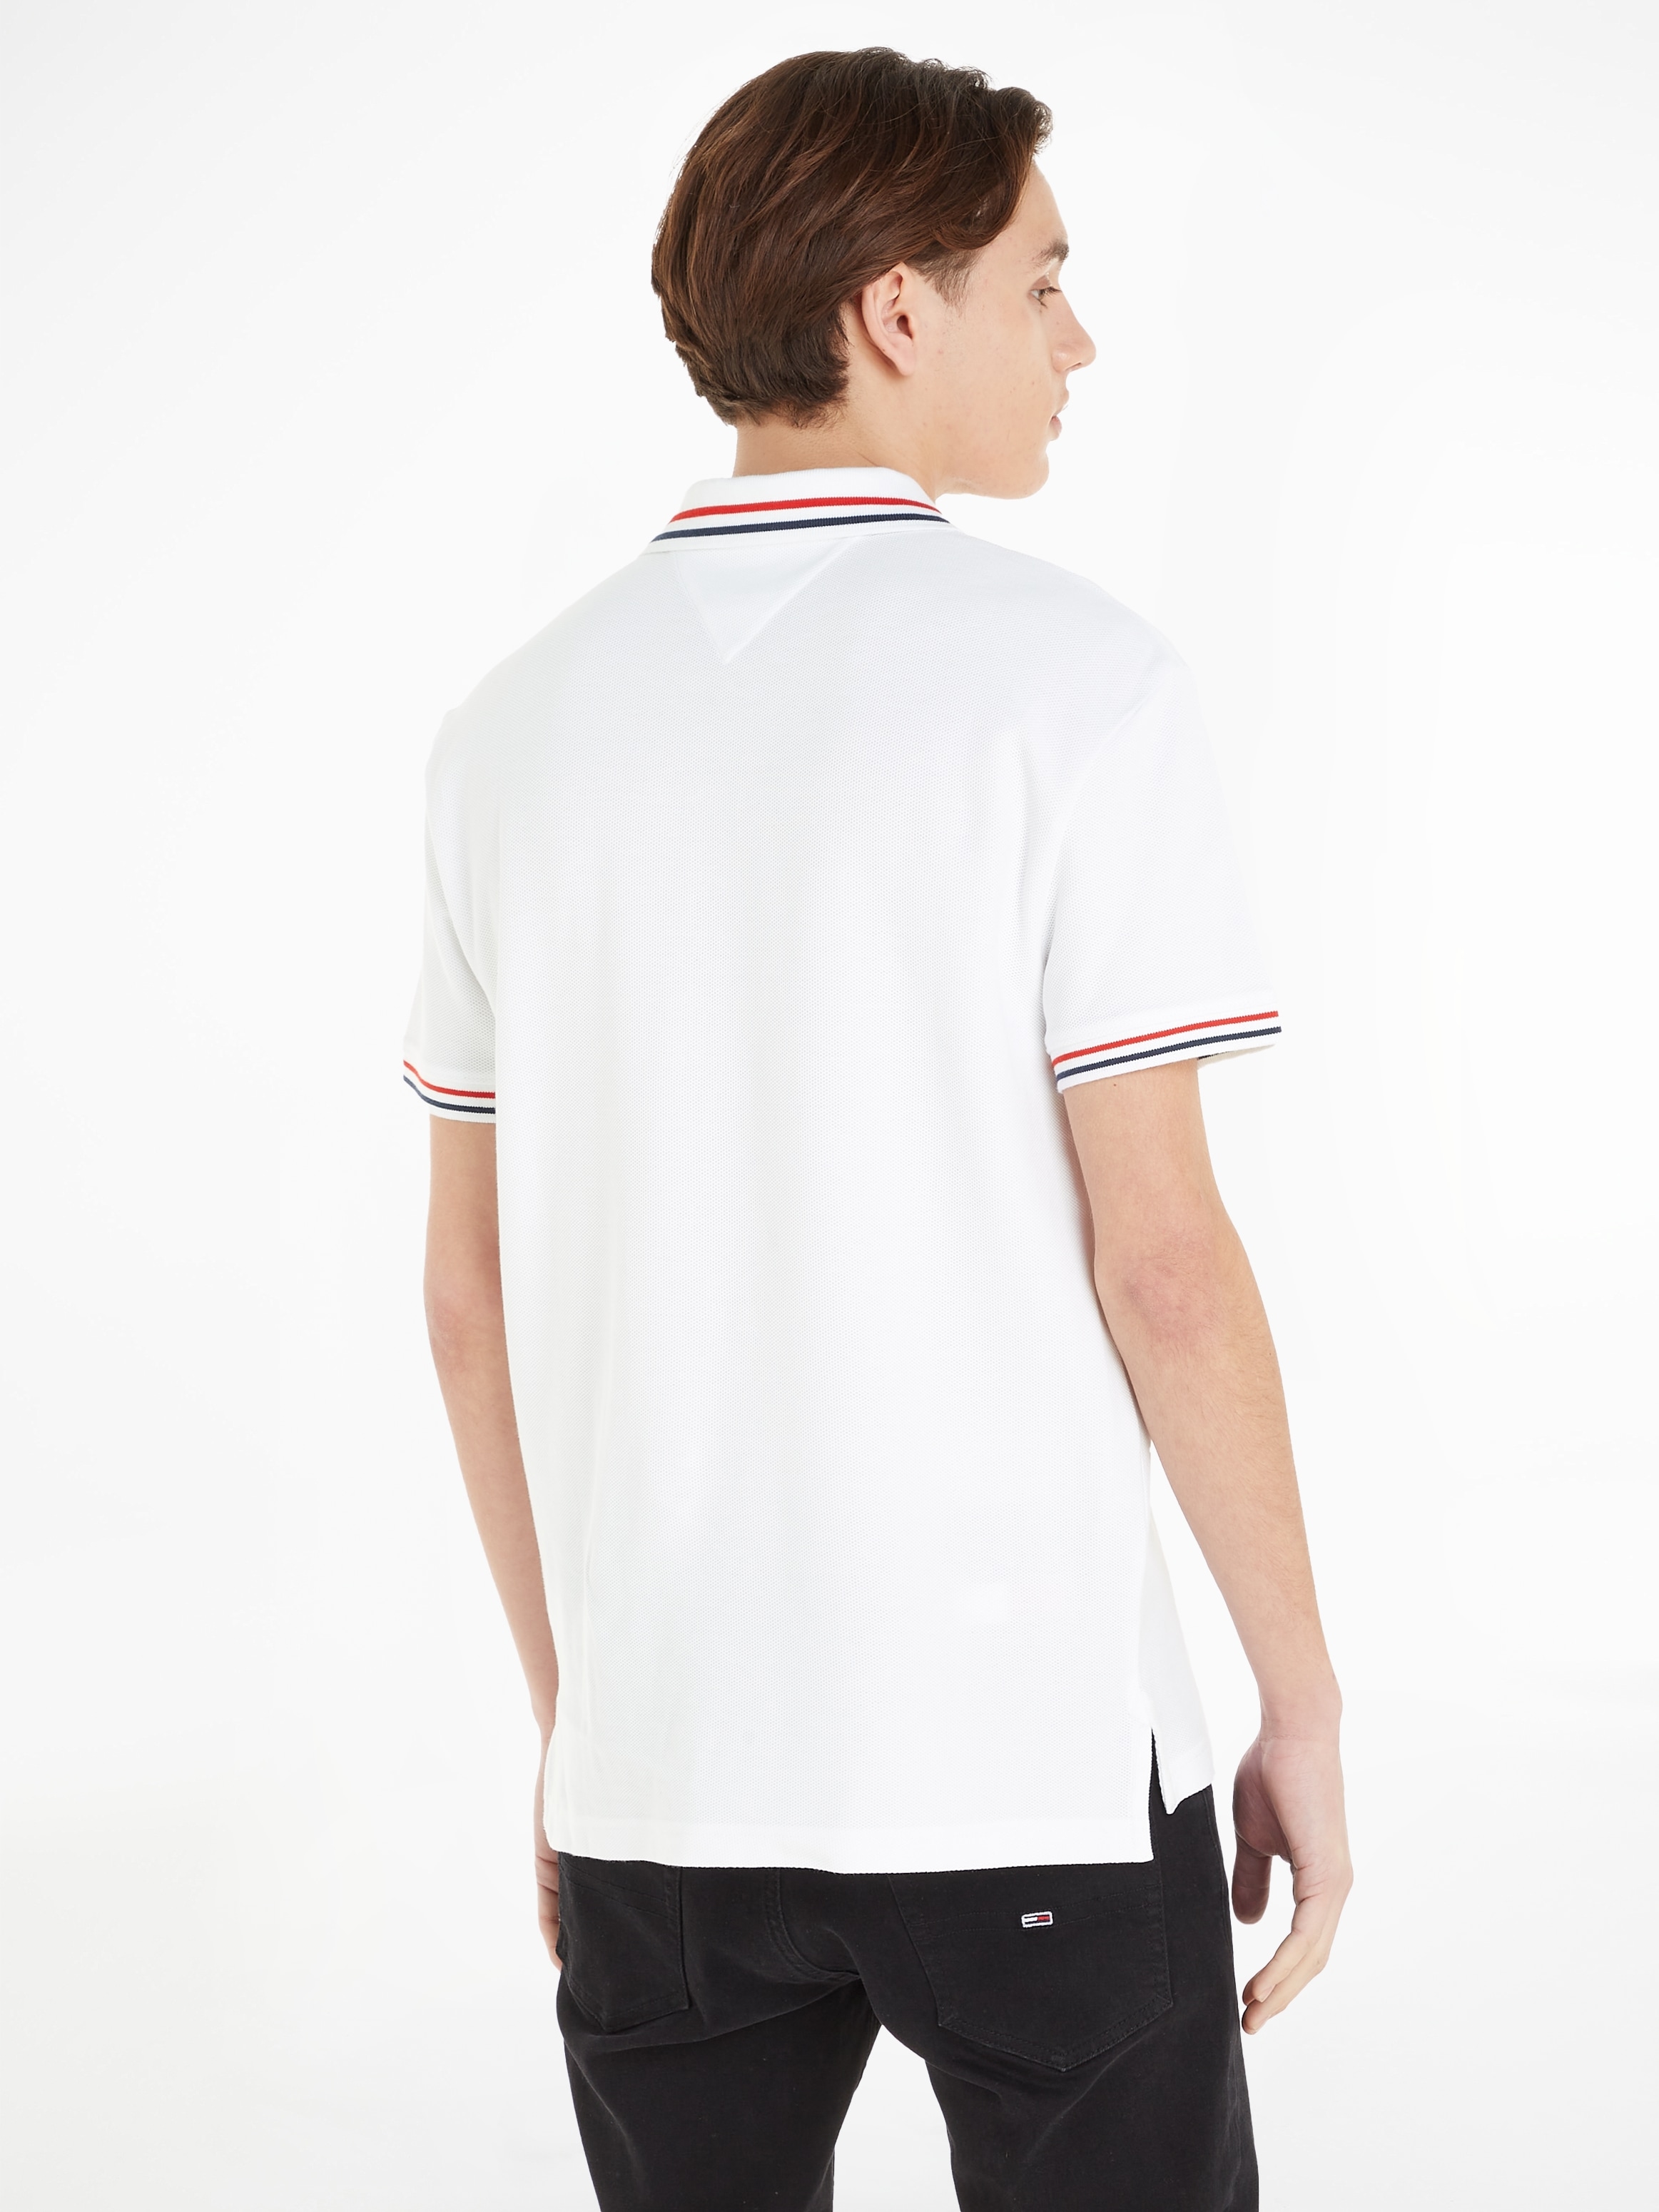 bestellen »TJM TIPPED bei Jeans OTTO CLSC Tommy GRAPHIC online Poloshirt POLO«